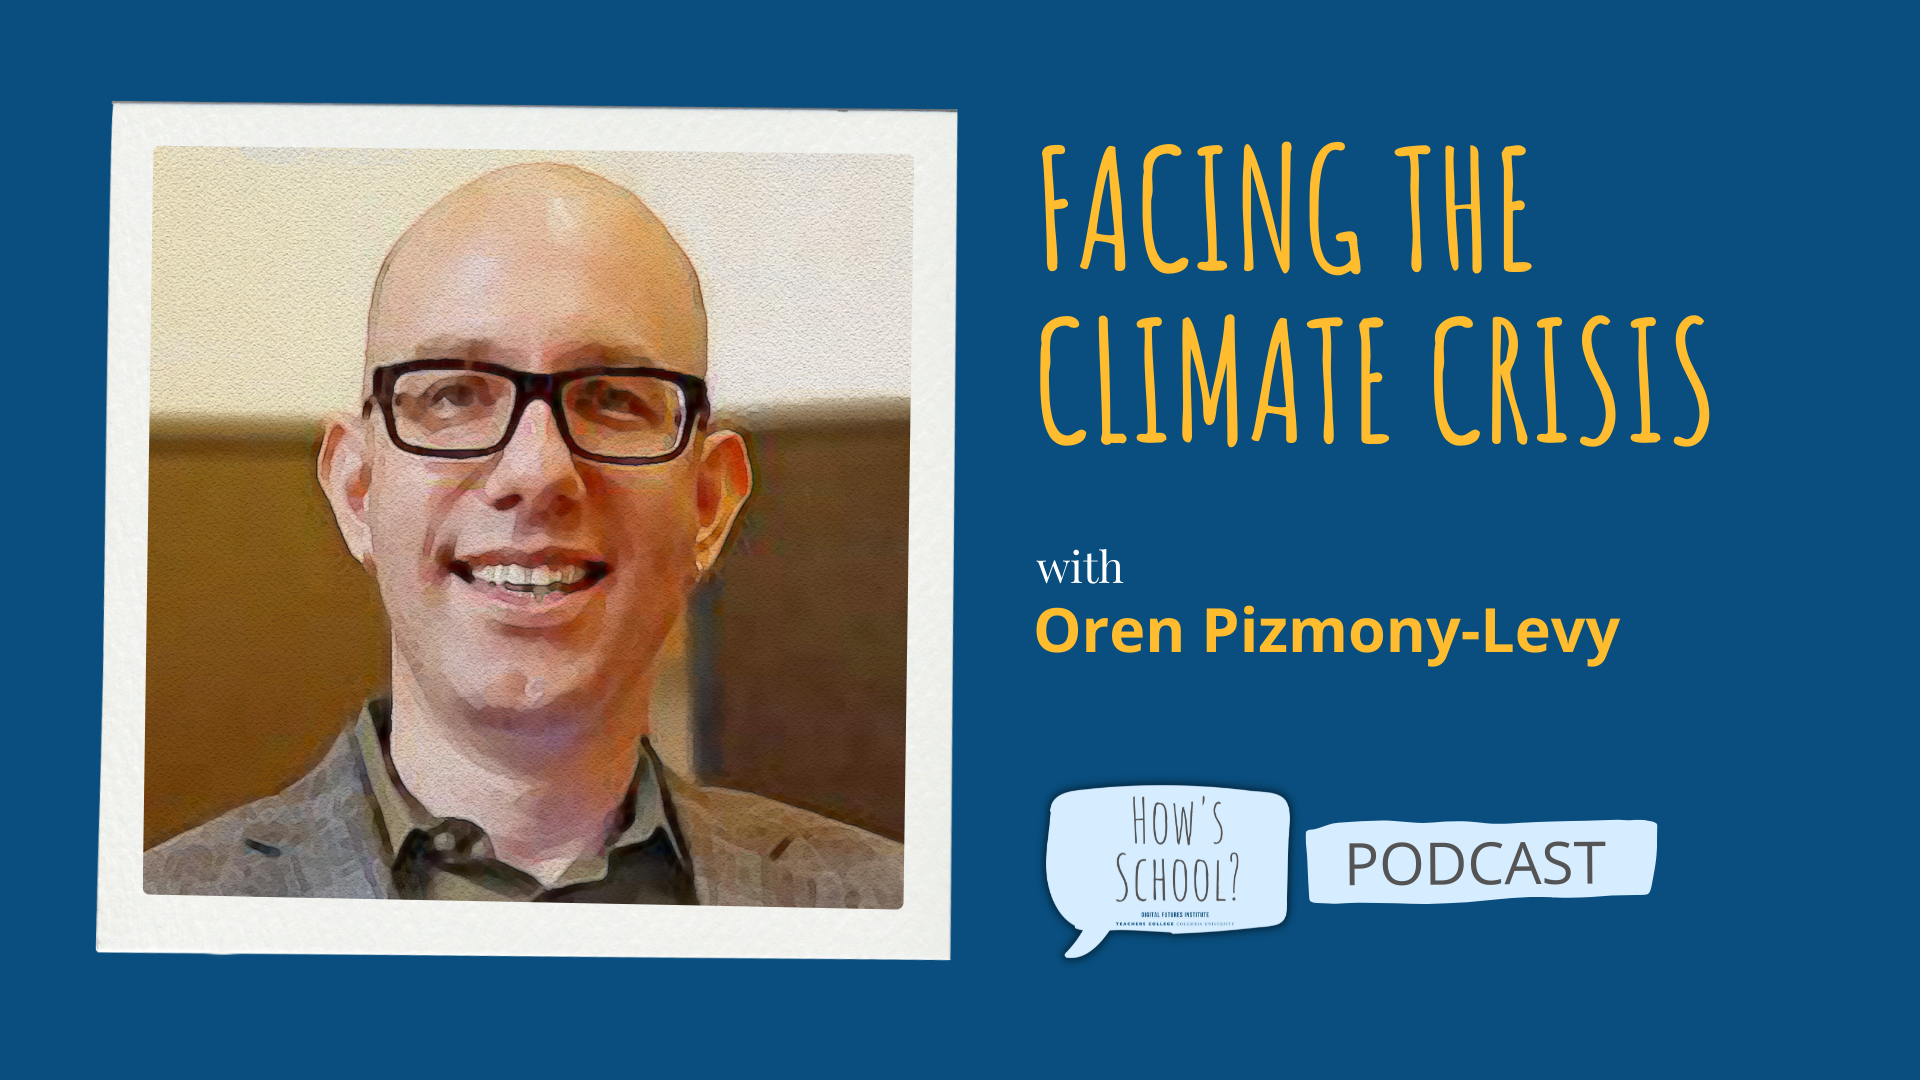 Facing the Climate Crisis with Oren Pizmony-Levy guest image on a navy background. How's School podcast logo